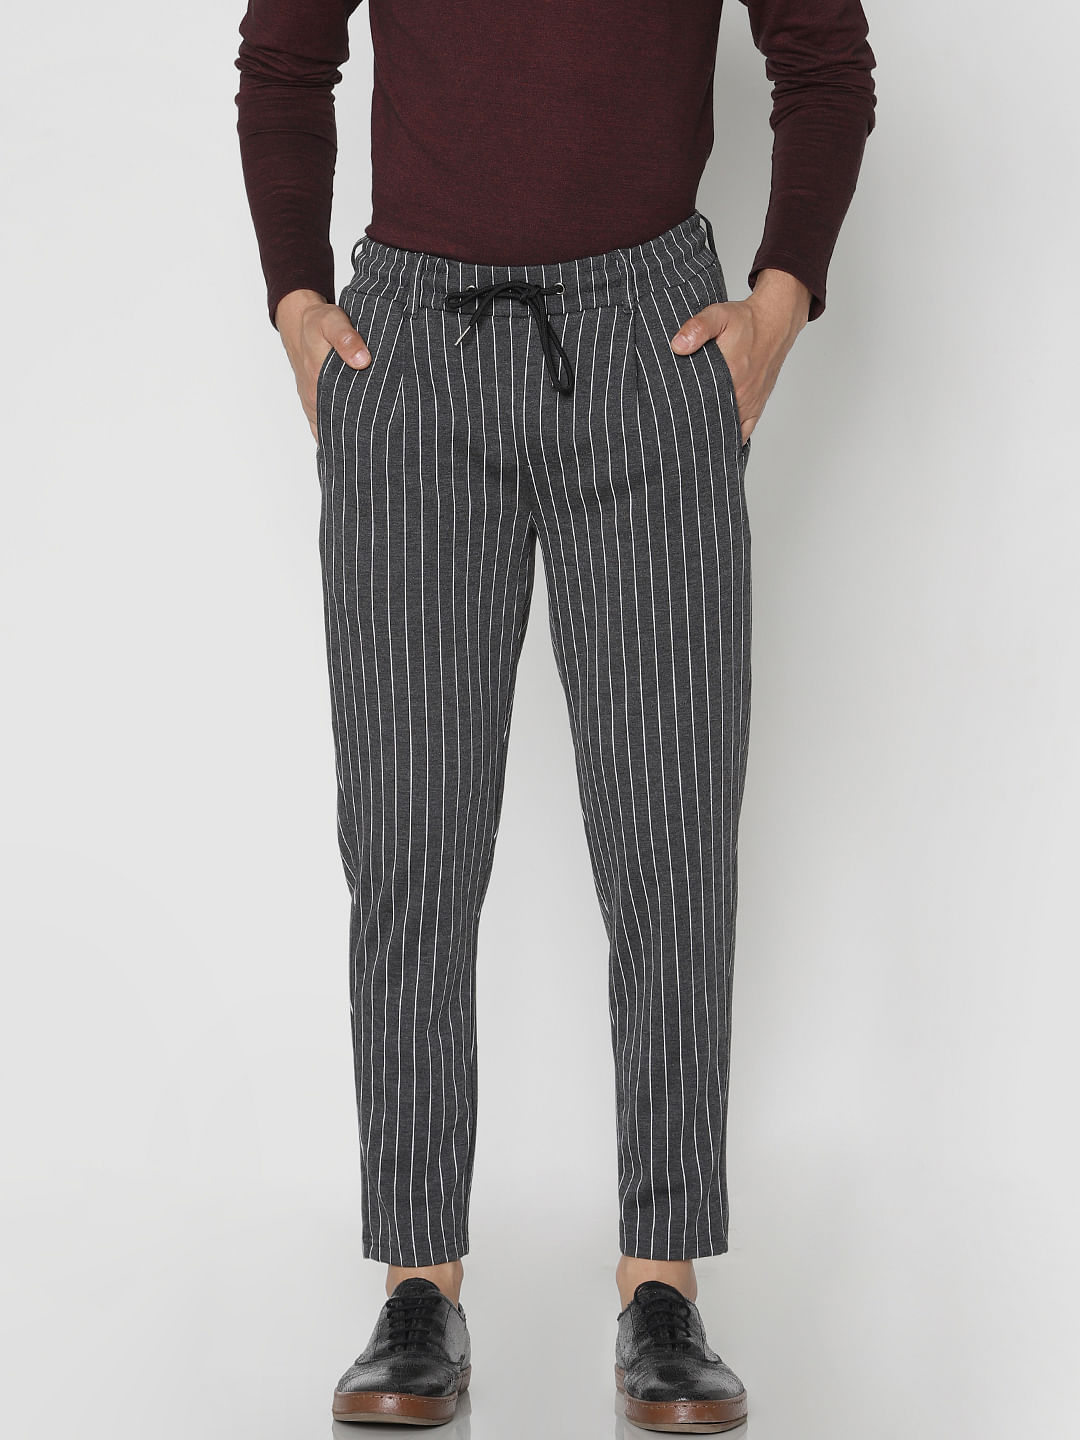 grey and black striped pants